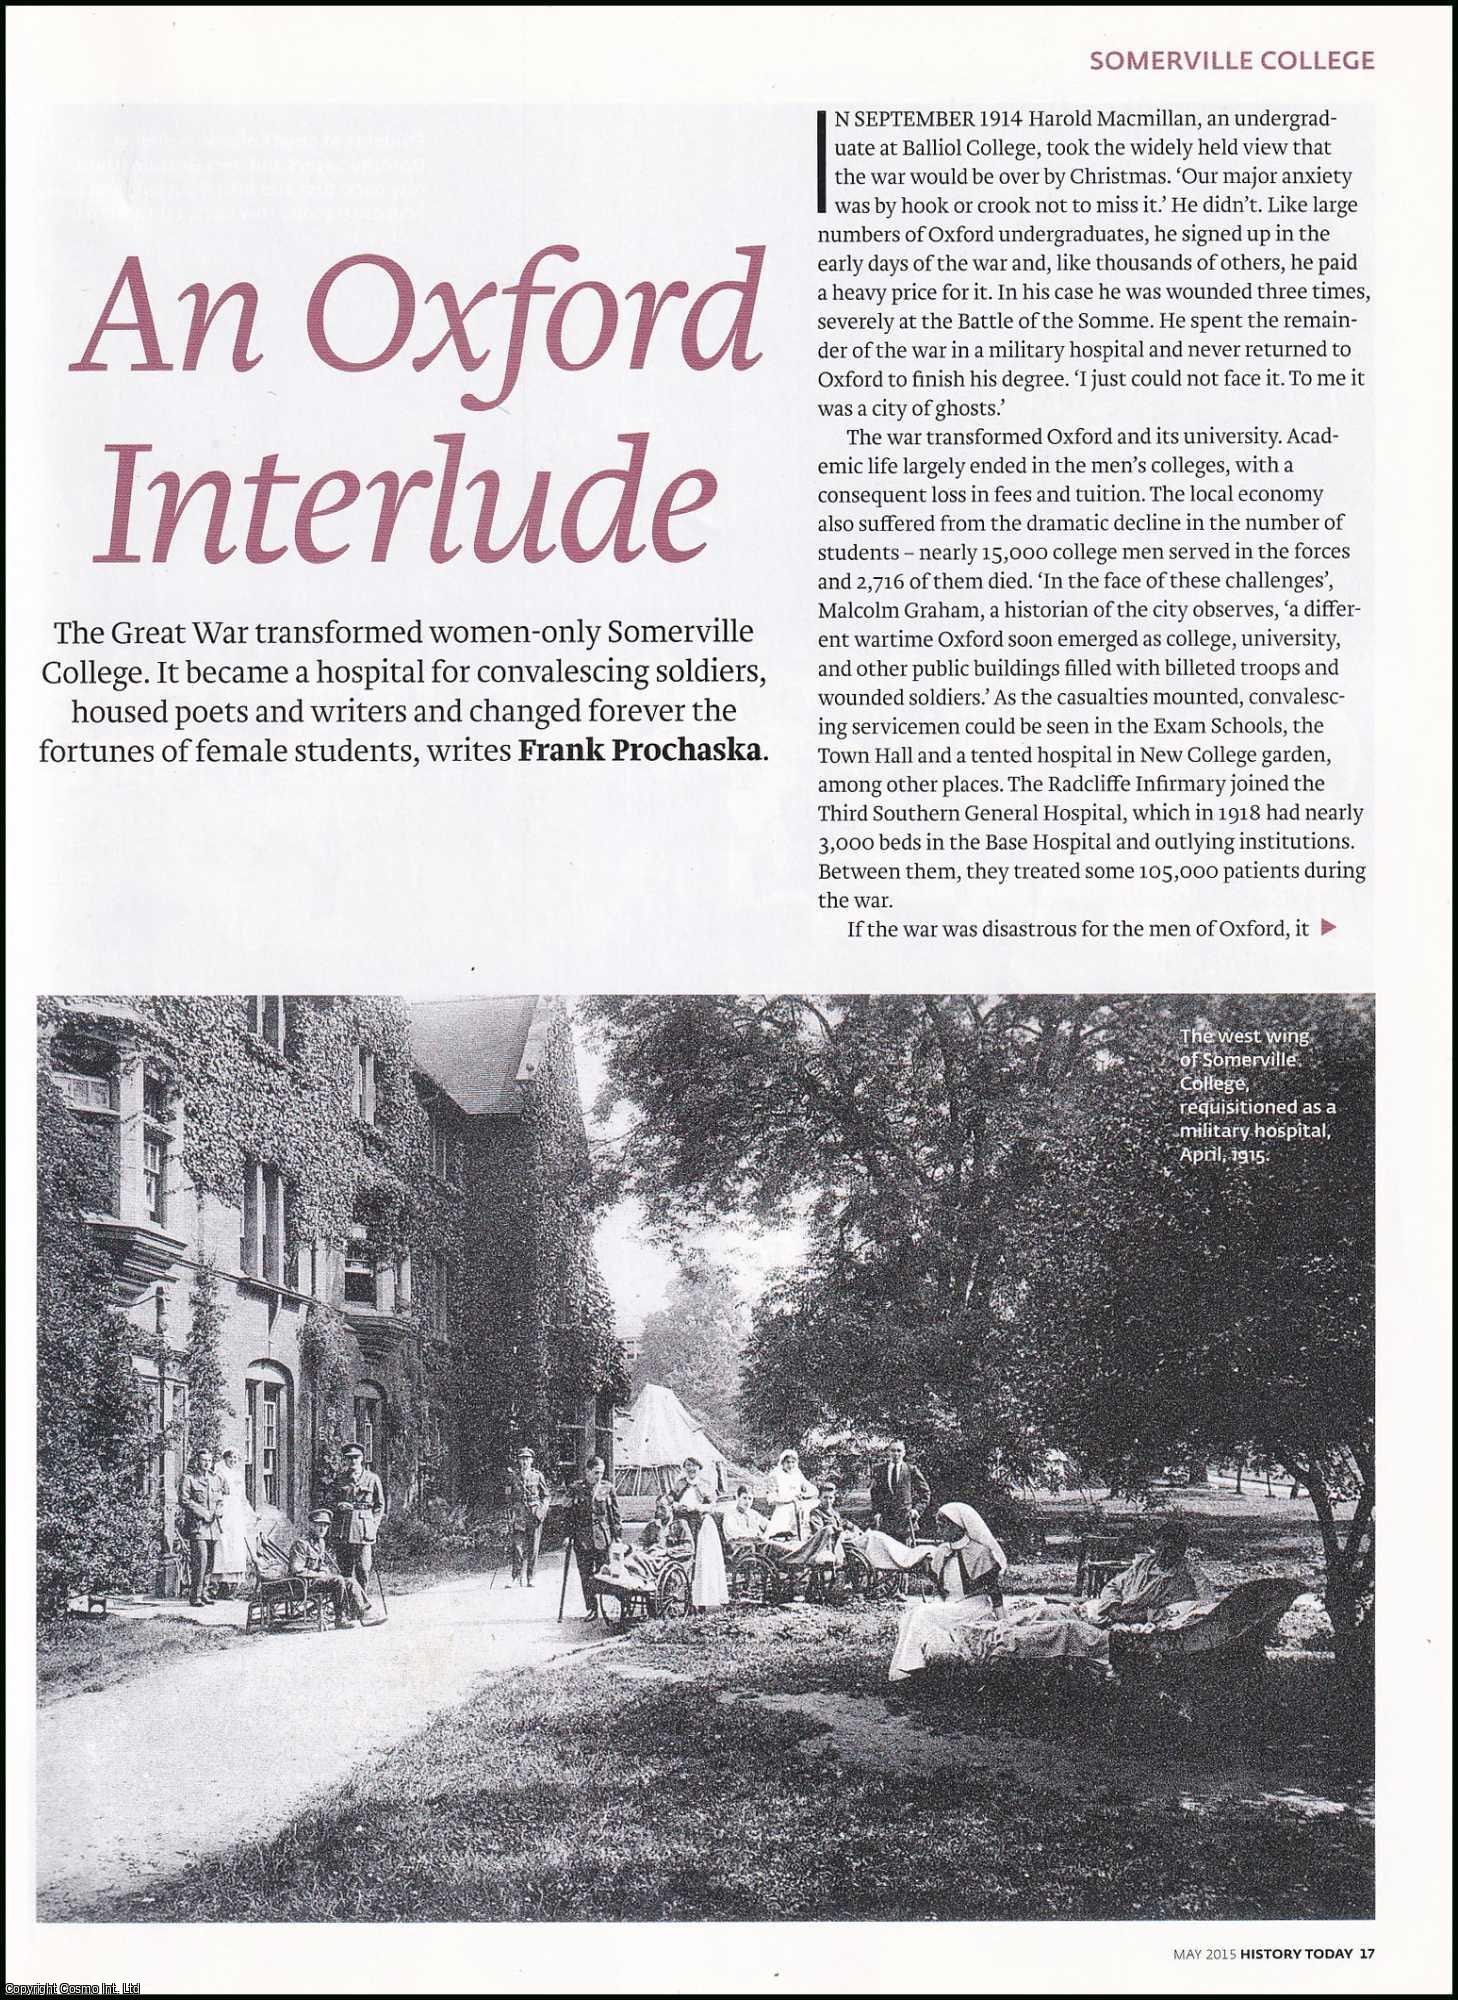 Frank Prochaska - How Sommerville College, Oxford's transformation during the Great War changed forever the Lives of Female Students. An original article from History Today magazine, 2015.